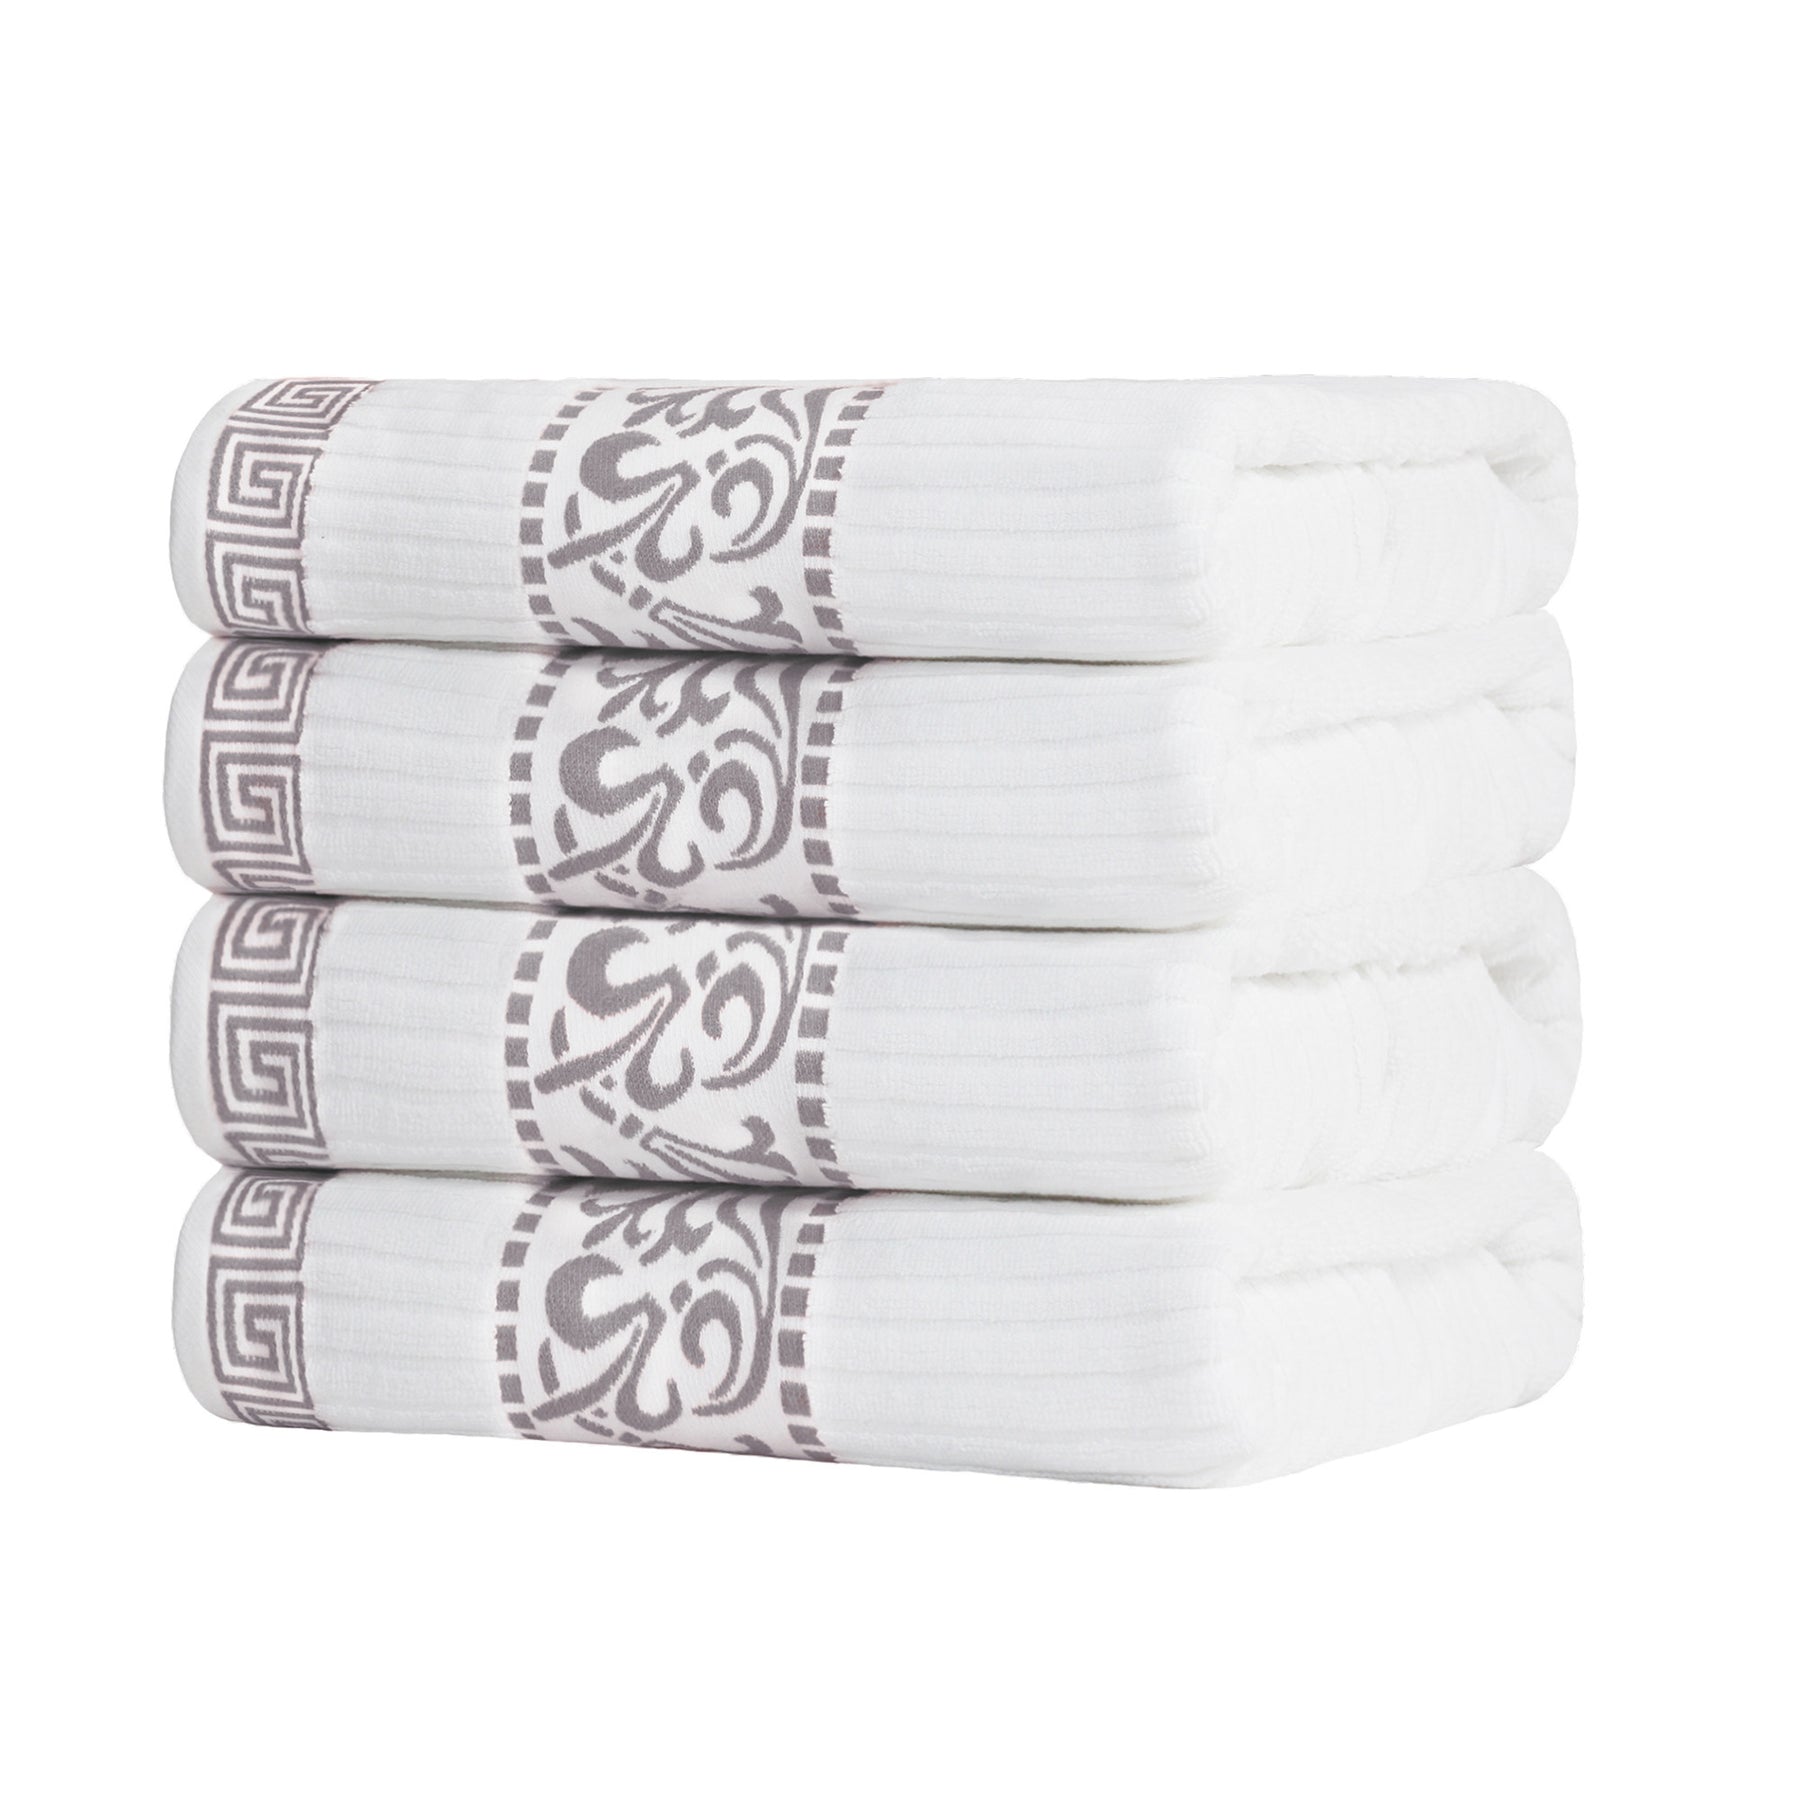 Superior Athens Cotton 4-Piece Bath Towel Set with Greek Scroll and Floral Pattern - White-Chrome